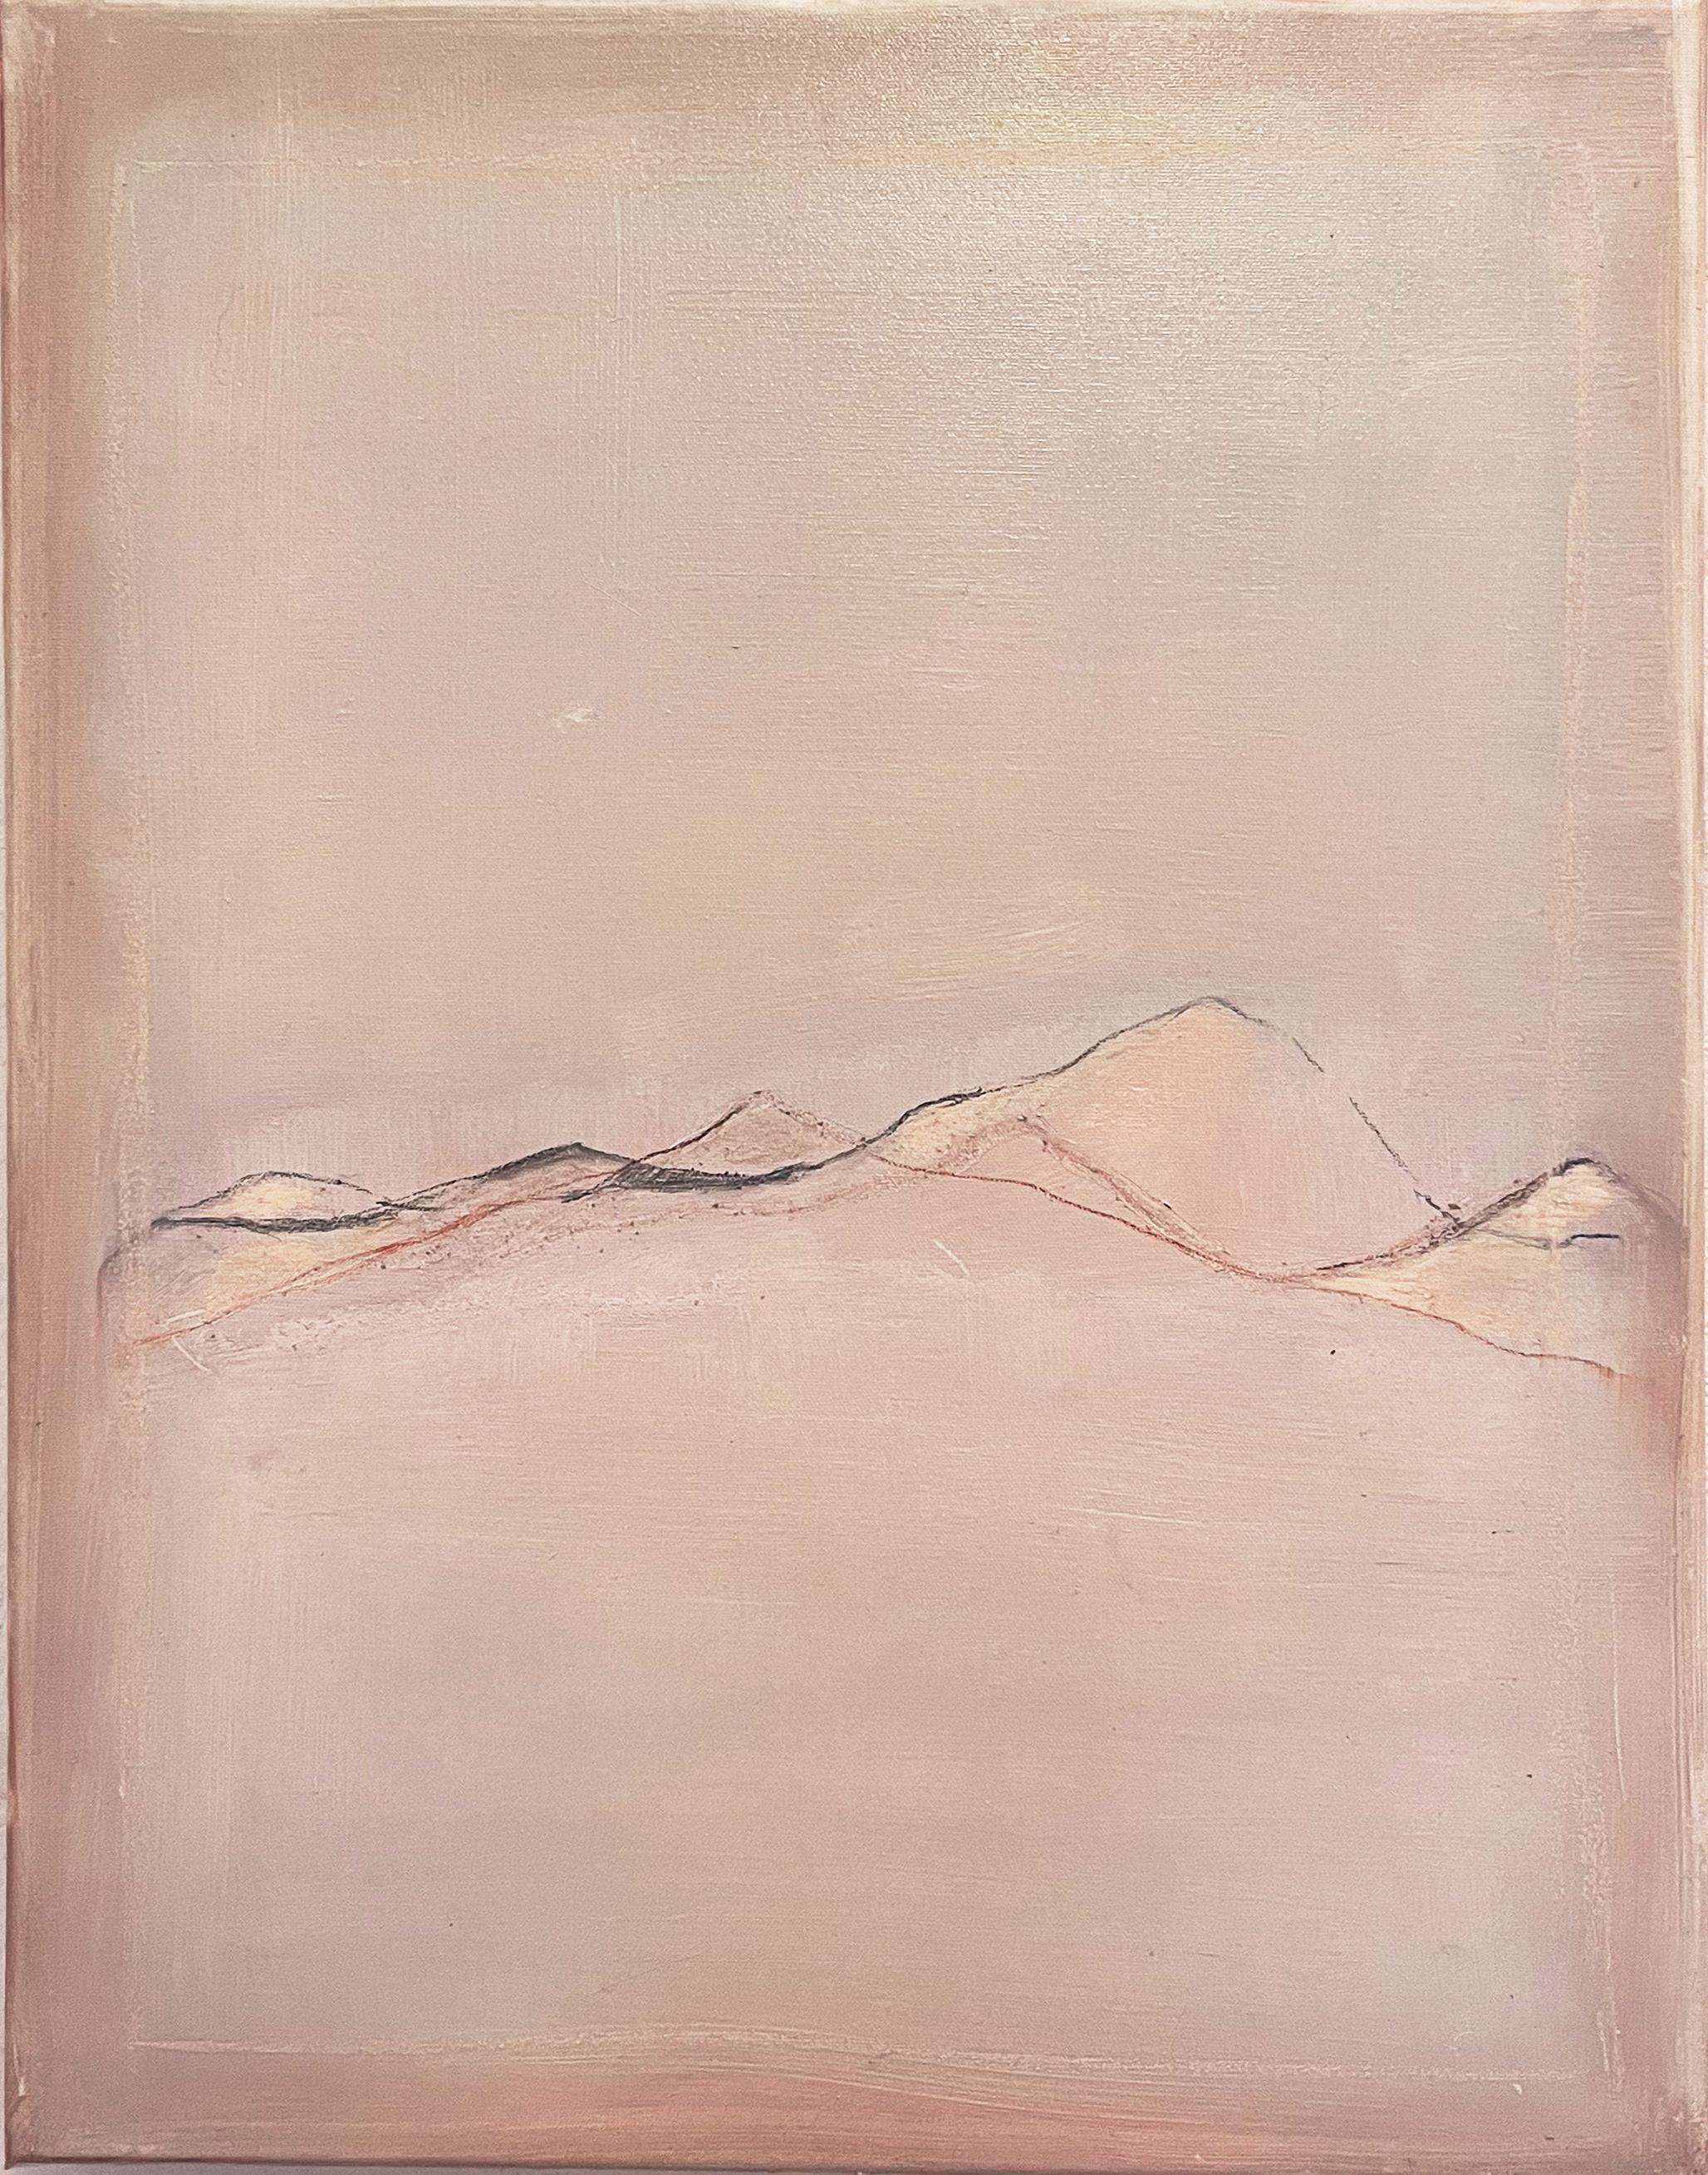 Marilina Marchica Abstract Painting - "Landscape" Minimalist Oil Paint on Canvas Original Art , Made in Italy